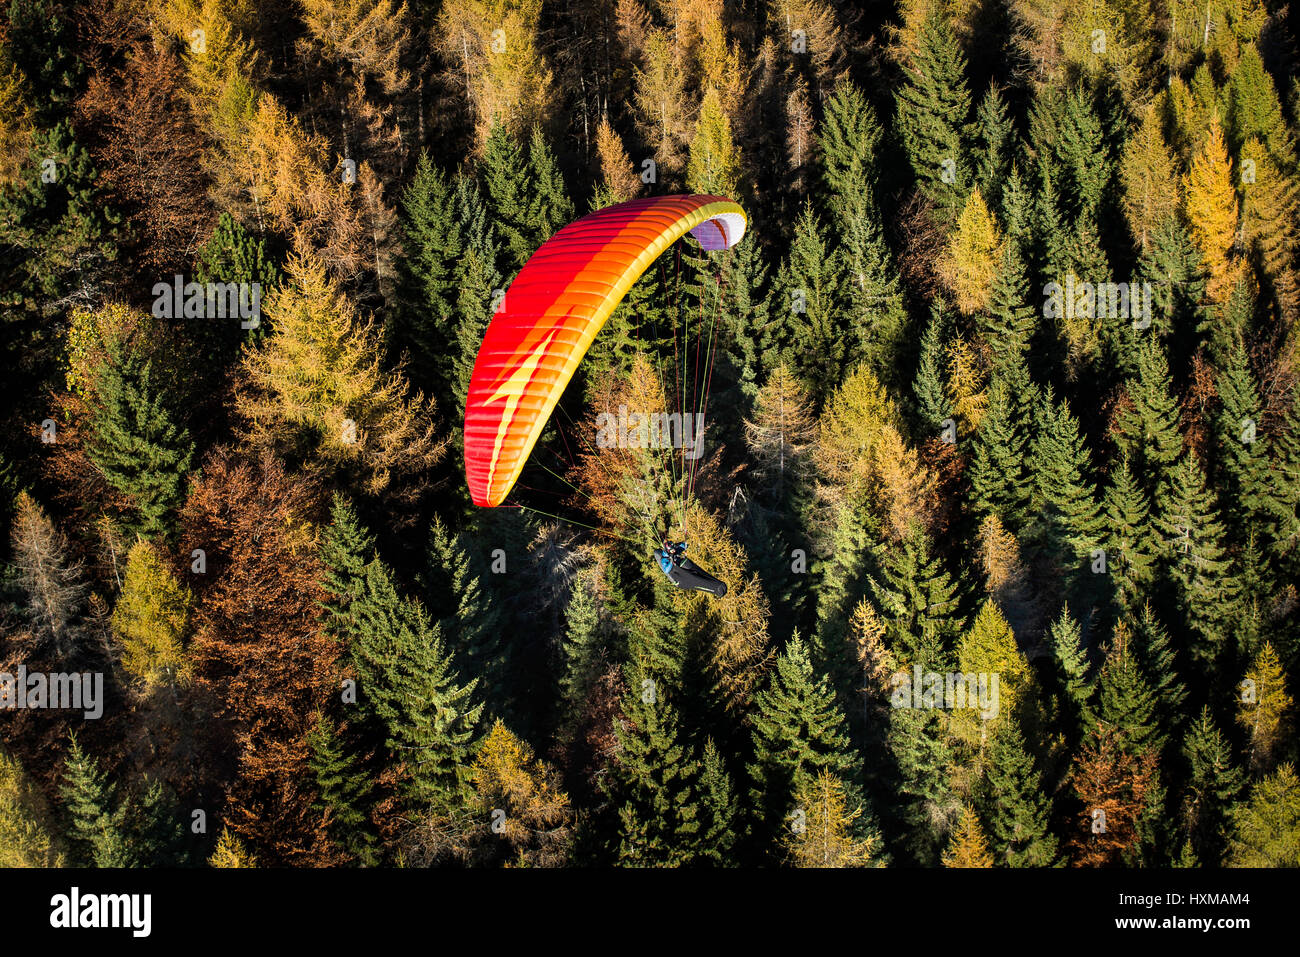 Paraglider flying over autumn woods, mixed forest, Monte Dolada, Province of Belluno, Veneto, Italy Stock Photo